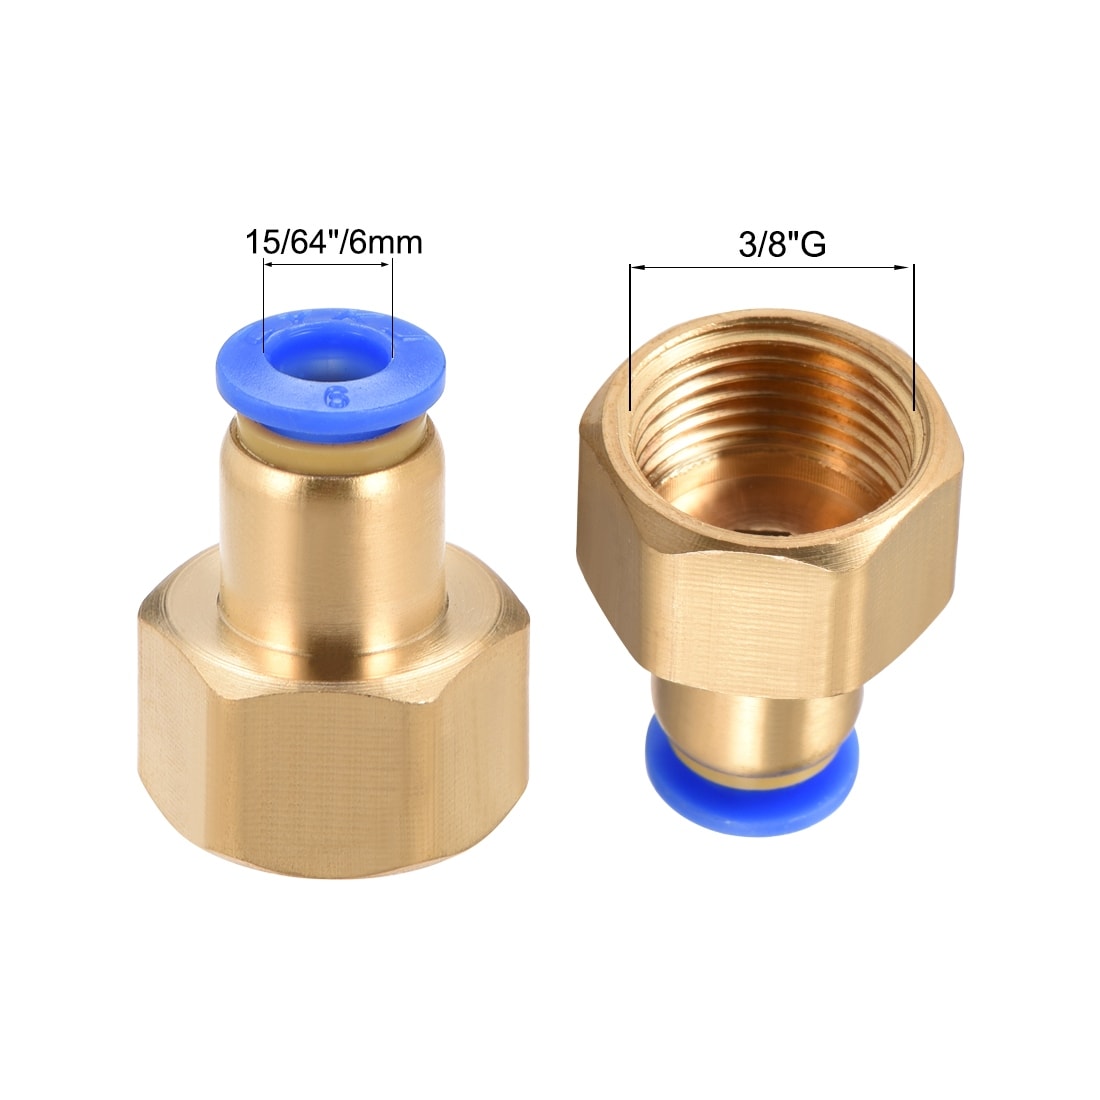 1pcs 6mm Pneumatic Air Valve Push In Joint Quick Fittings Adapter 